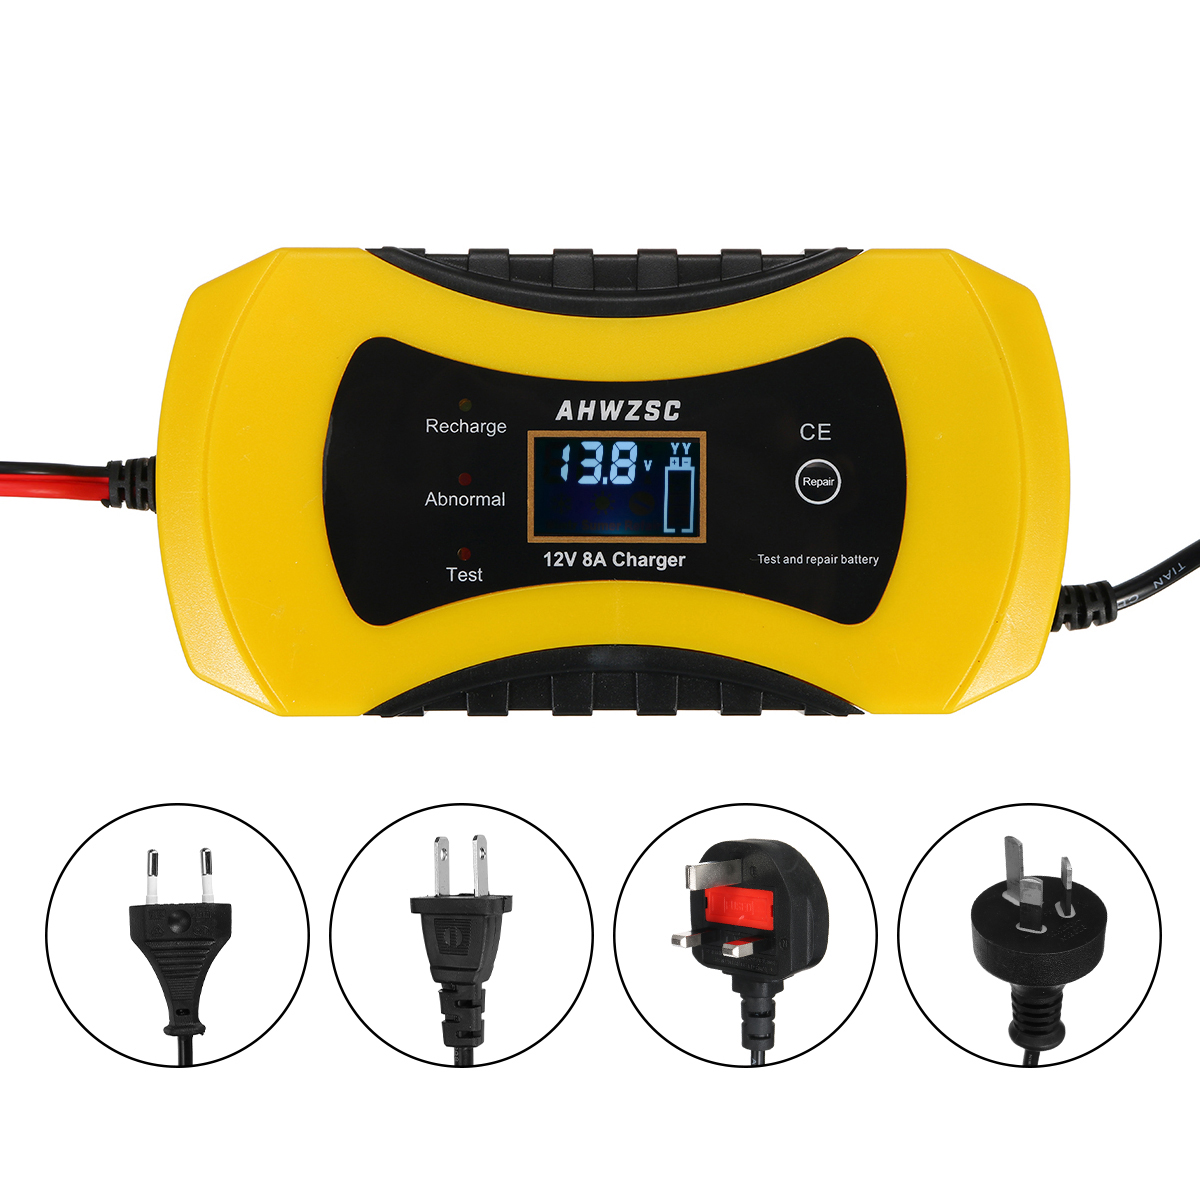 12V 8A LCD Pulse Repair Battery Charger for Car Motorcycle AGM Gel Wet Lead Acid